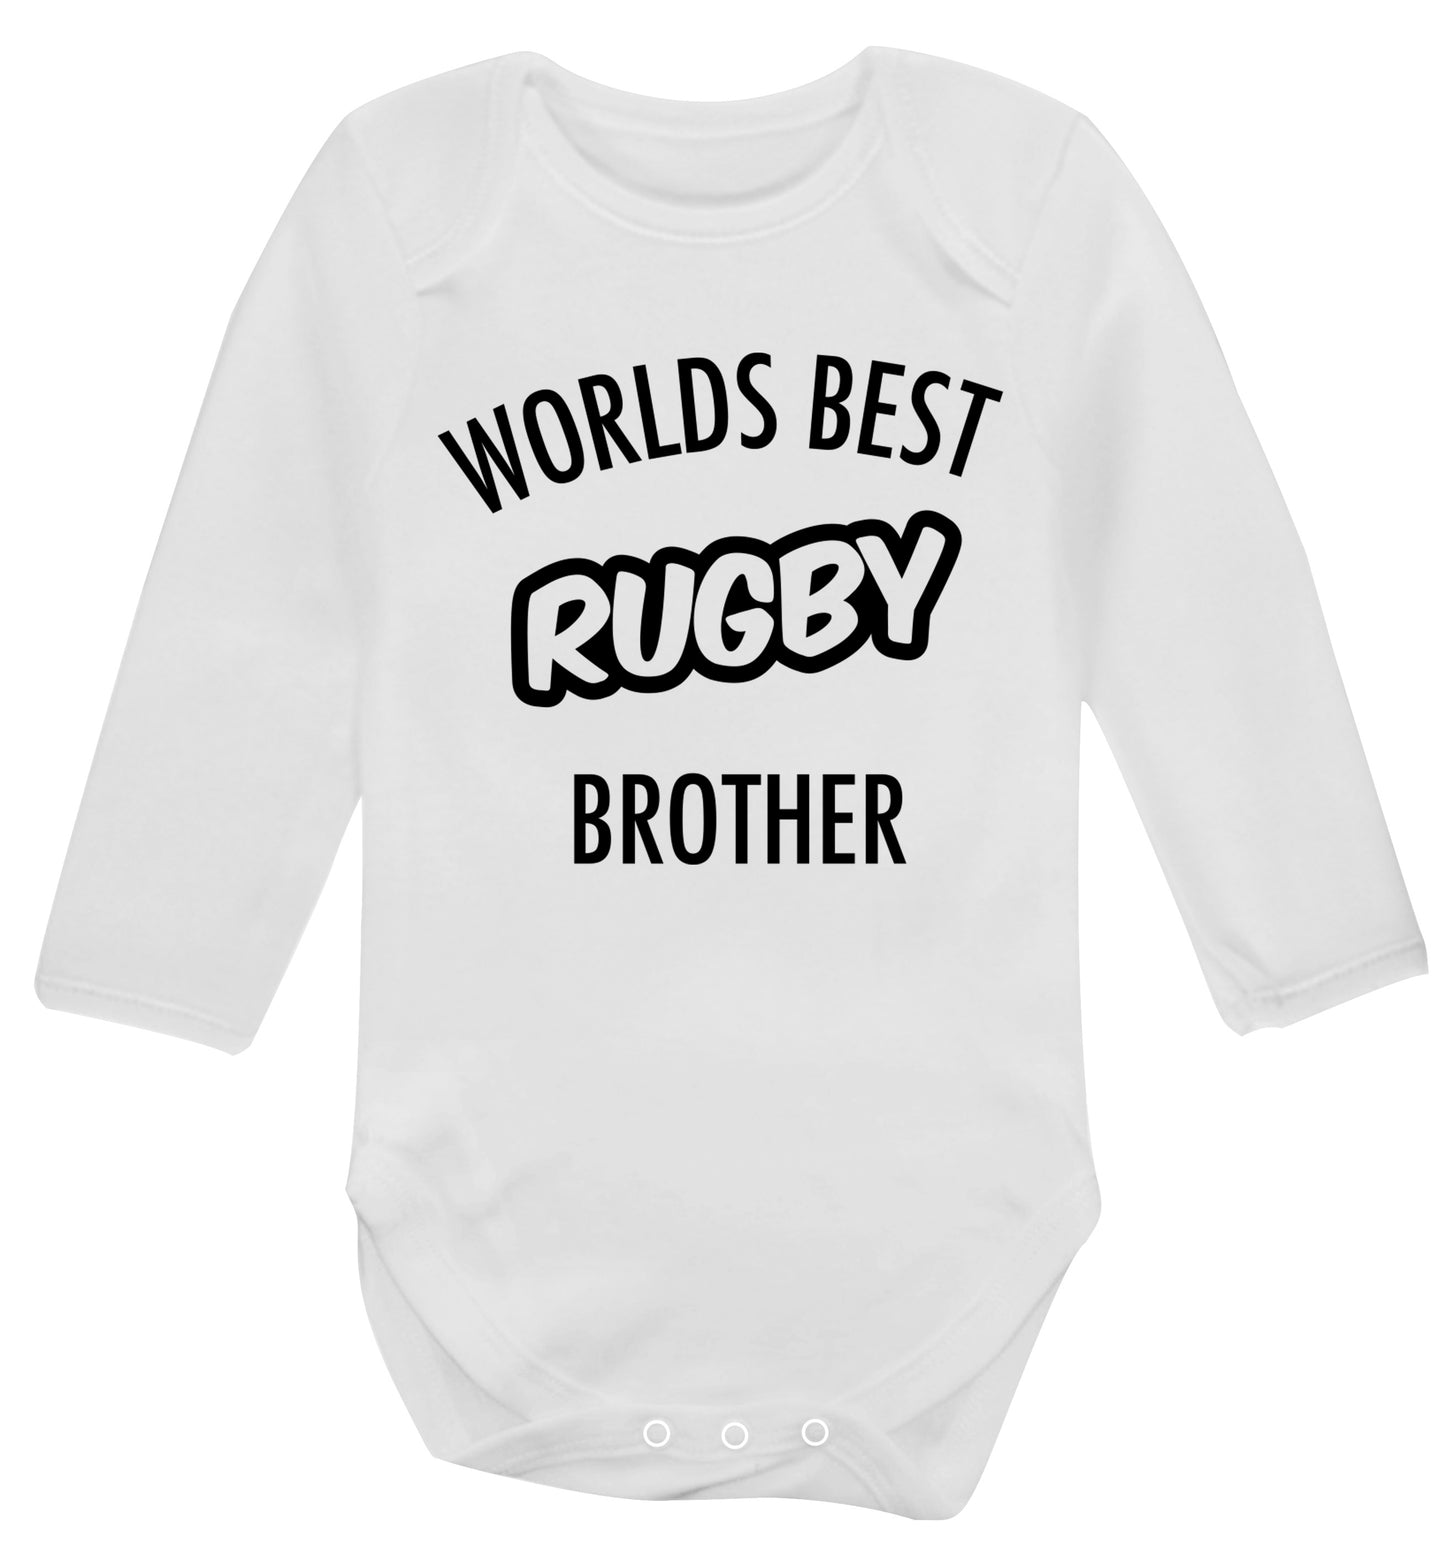 Worlds best rugby brother Baby Vest long sleeved white 6-12 months